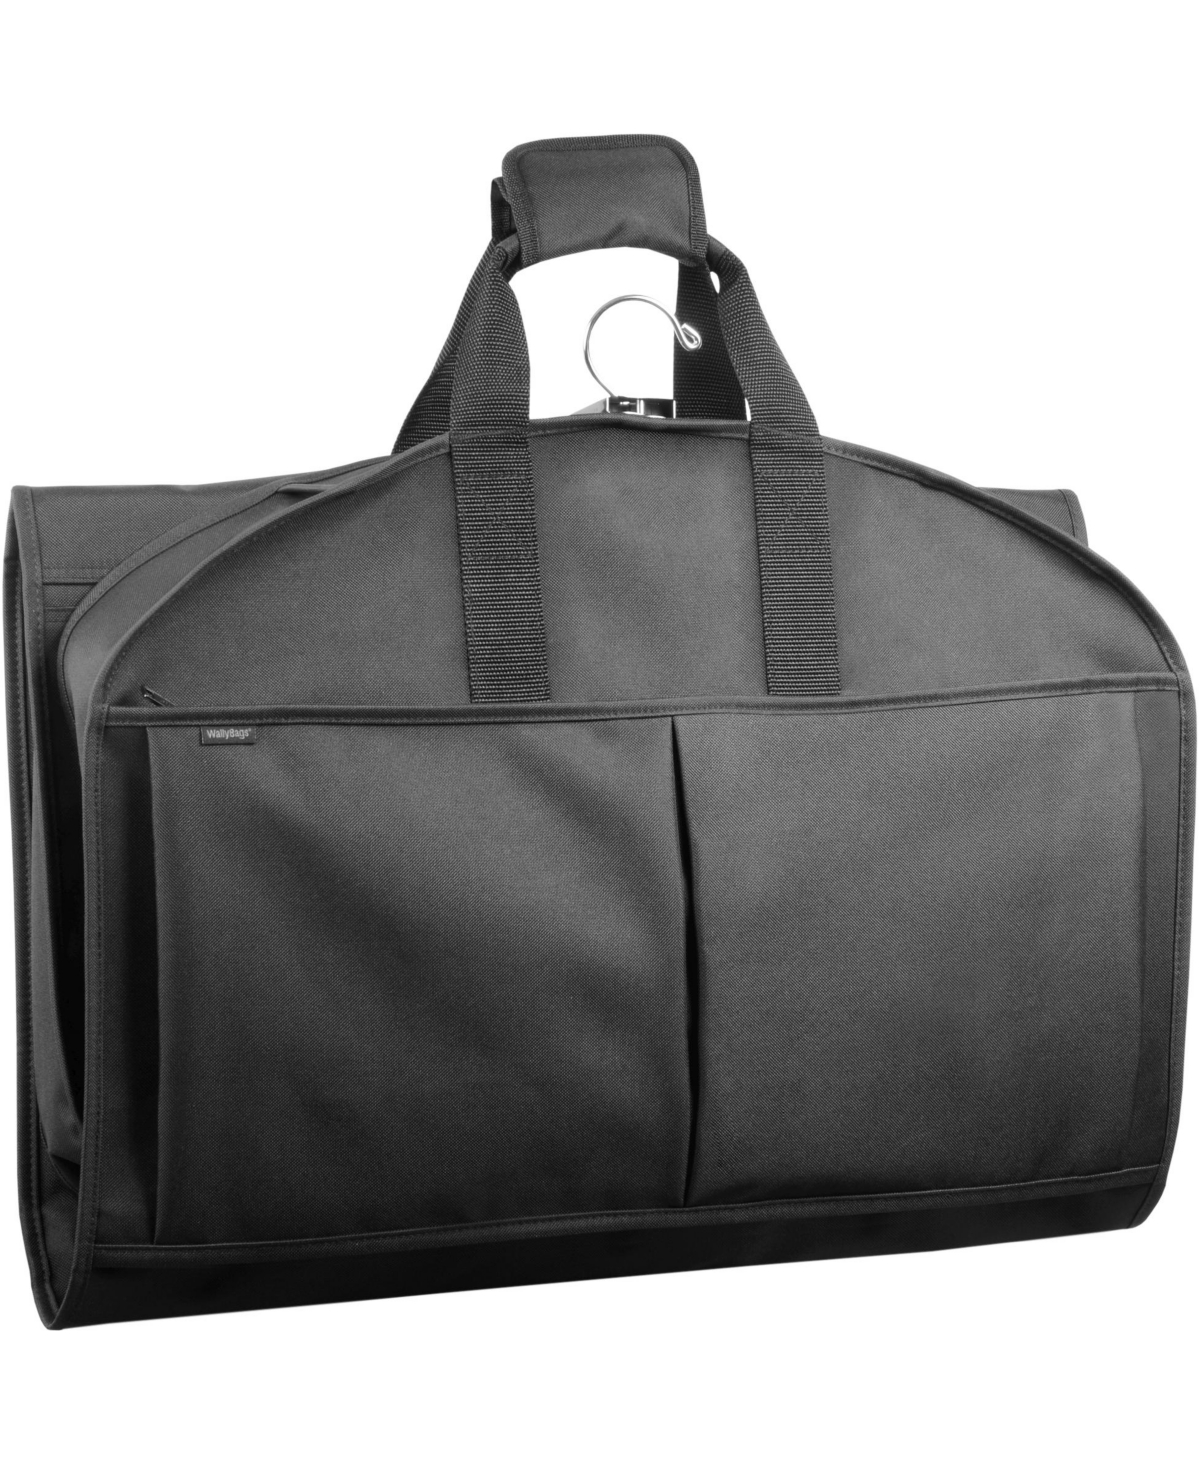 48" Deluxe Tri-Fold GarmenTote with Pockets - Black